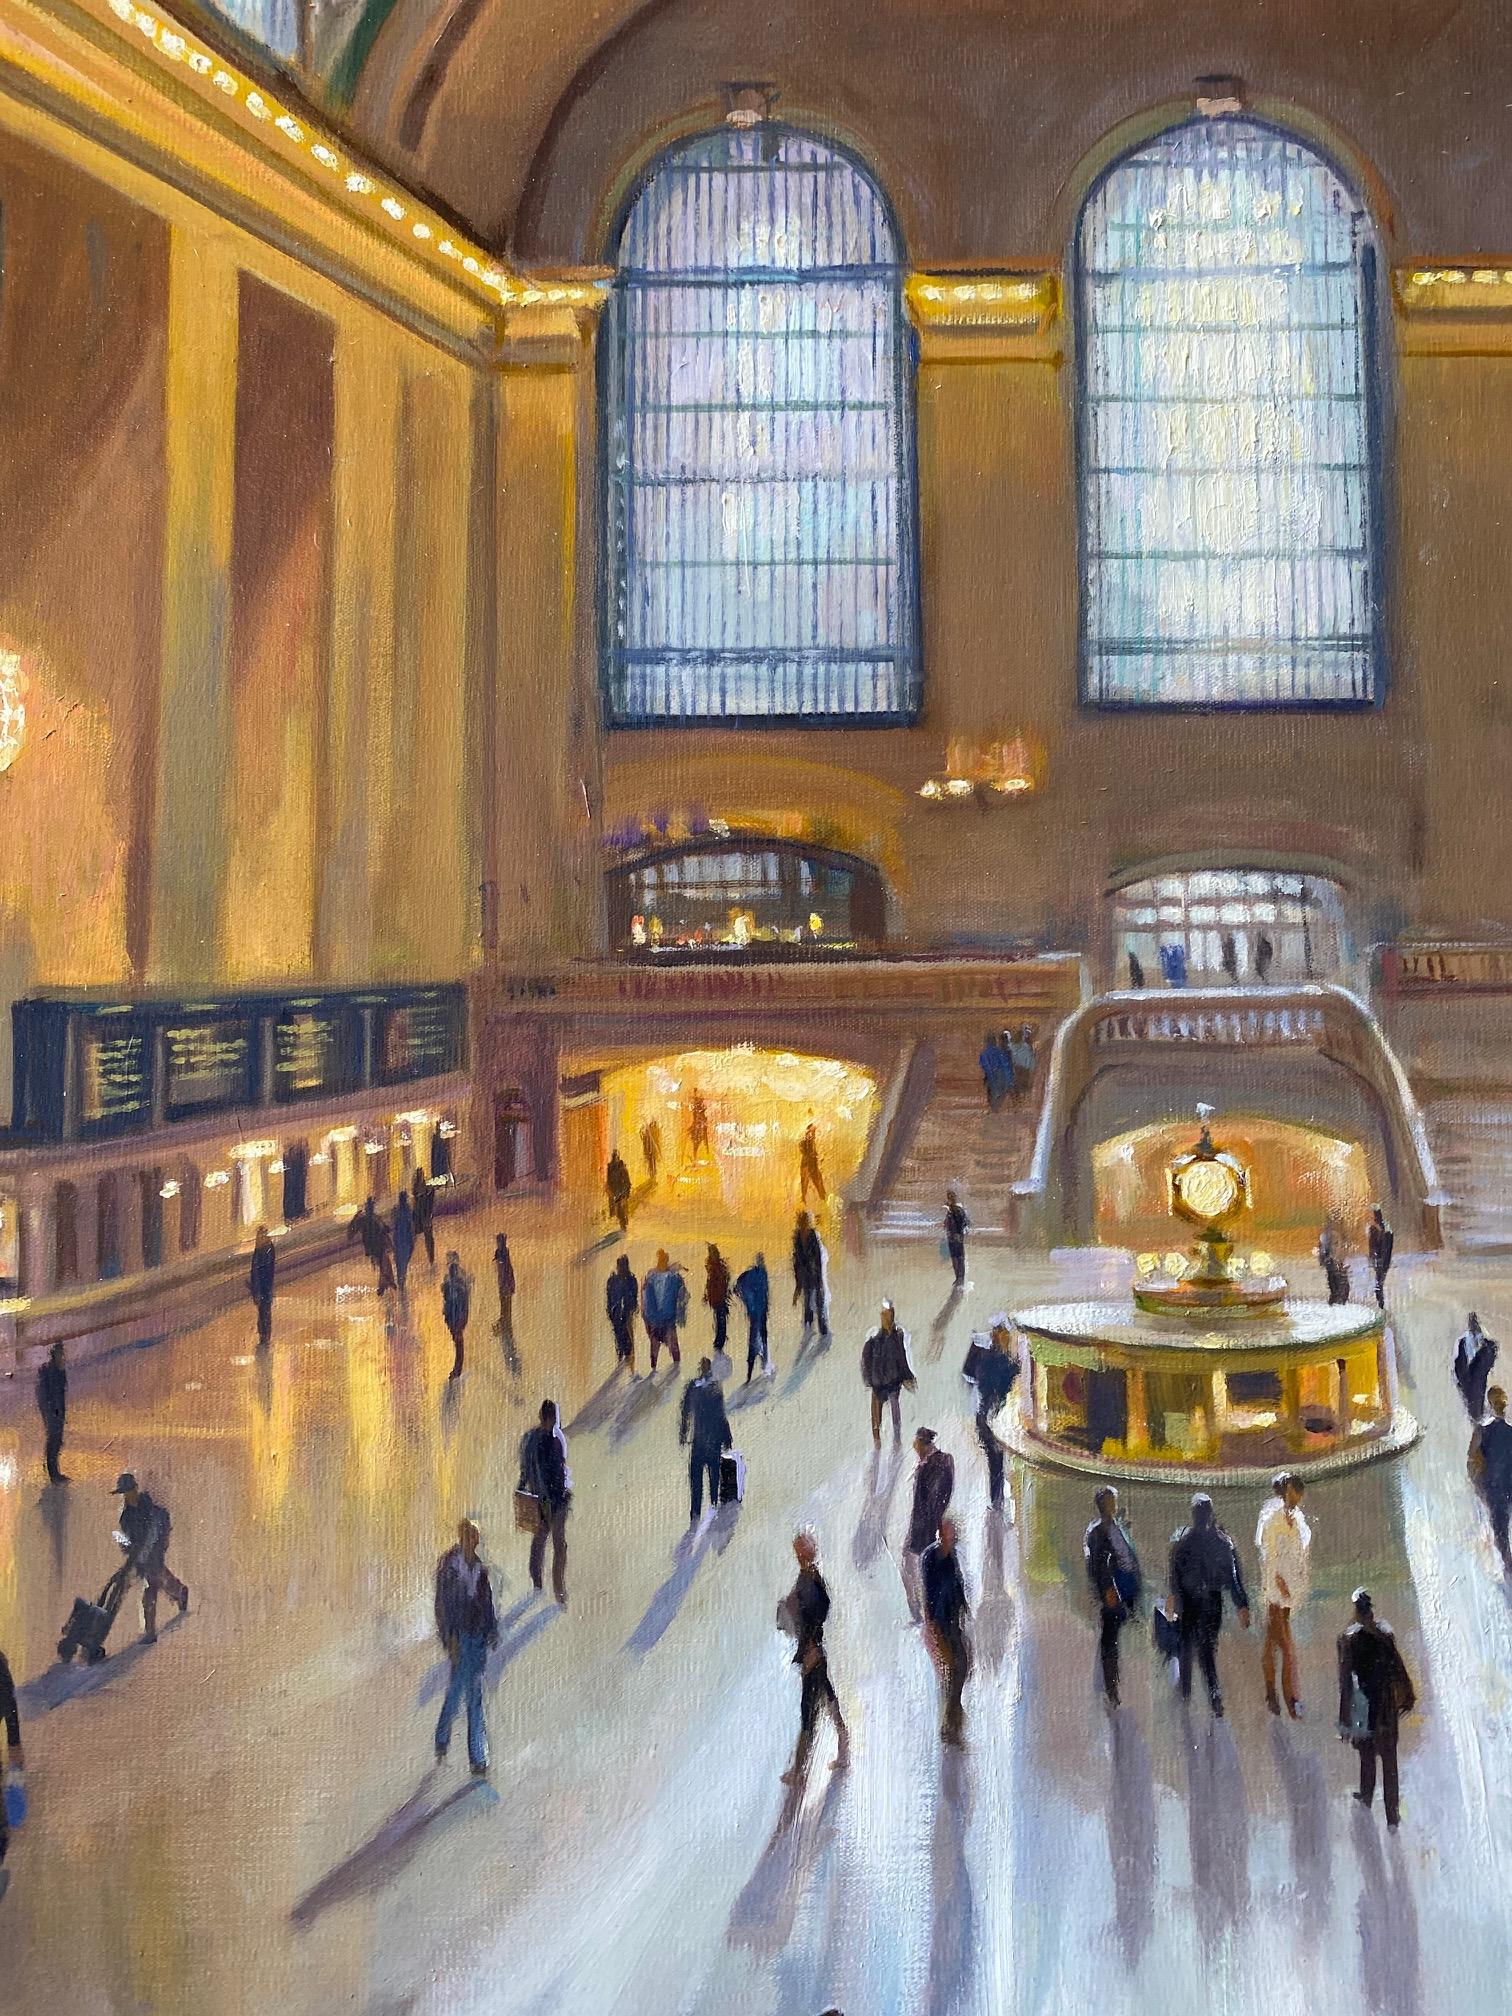 Grand Central Terminal in NYC is more than a transportation hub!  It remains the hub of dreams, a gateway to excitement and accomplishment for residents, visitors, workers, tourists and officials from around the world!  This contemporary yet